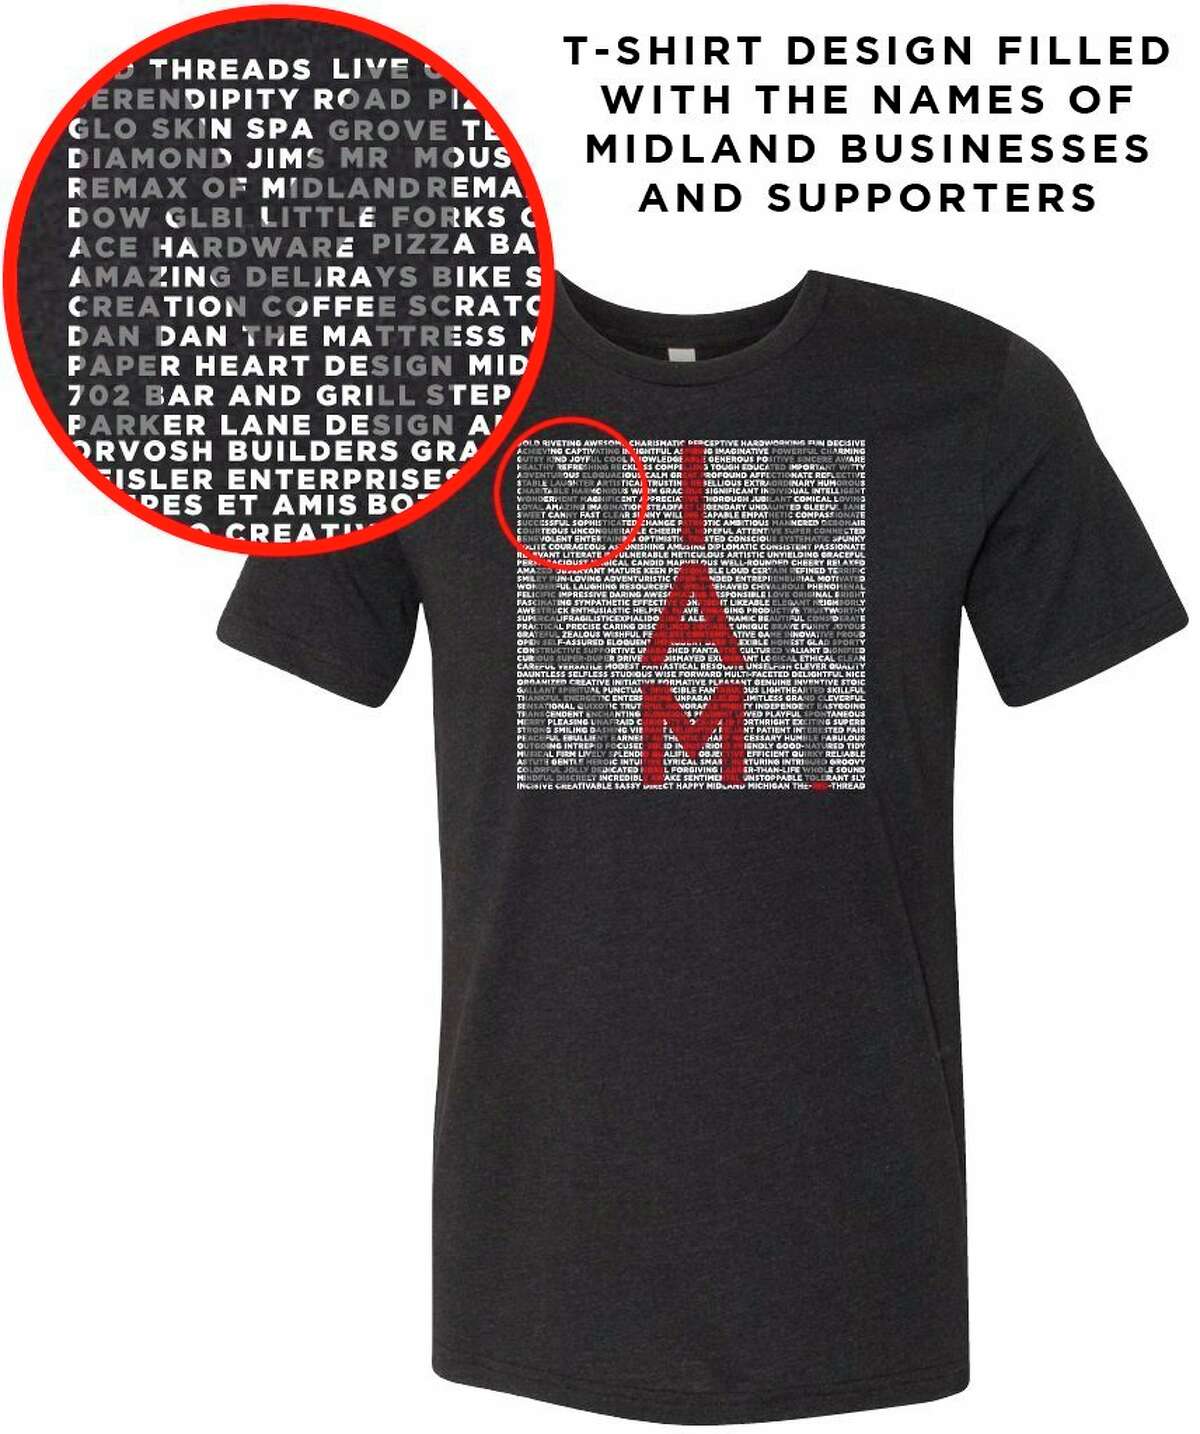 A concept idea for the "I Am Midland" t-shirt from Red Threads gives an idea of what the final t-shirt design will look like. (Photo provided)